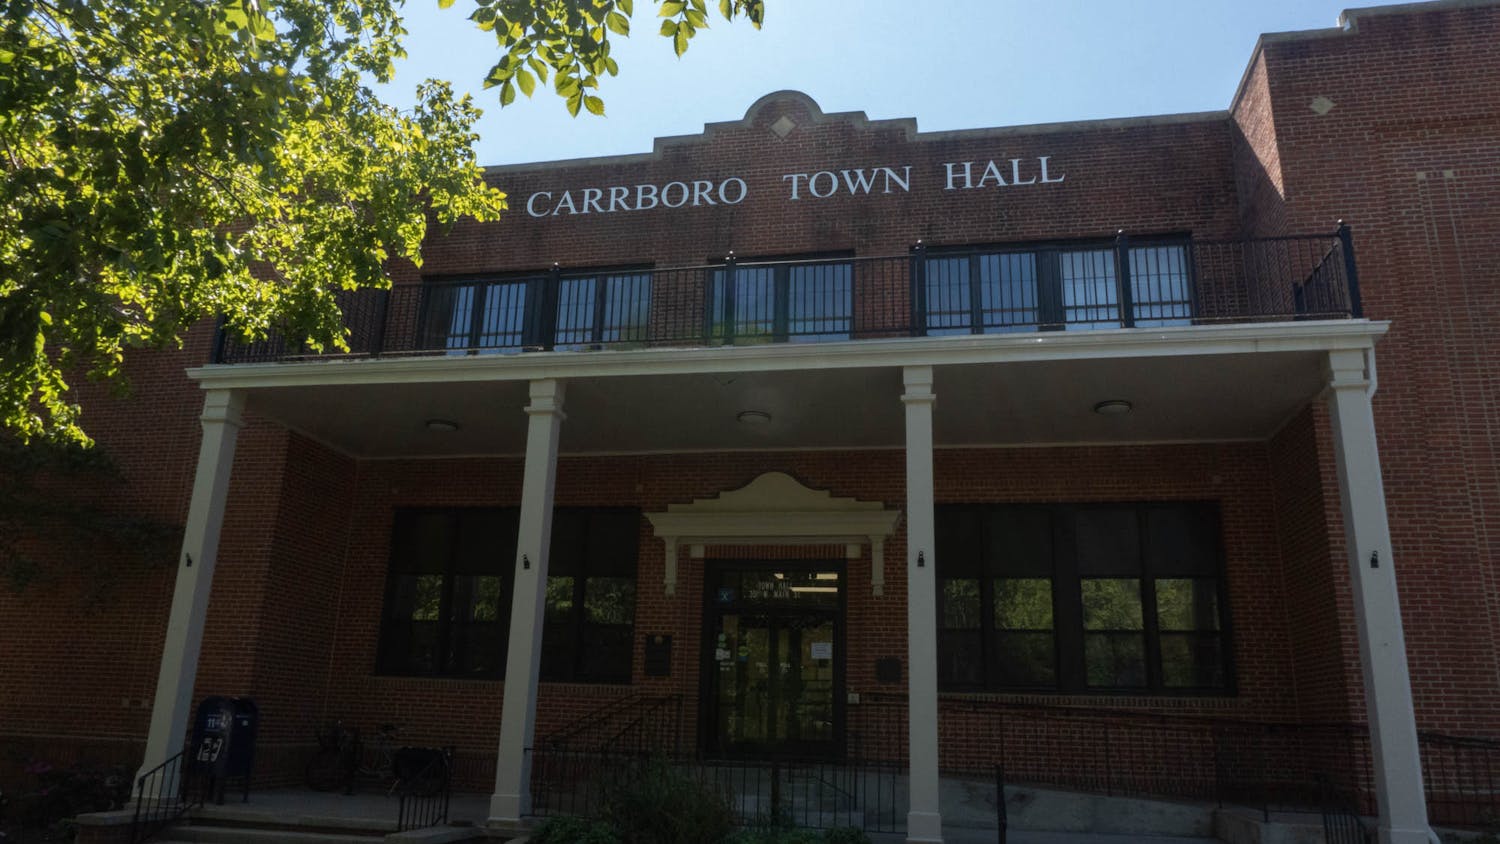 You_20230915_city-carrboro-town-council-preview-update-10.jpg